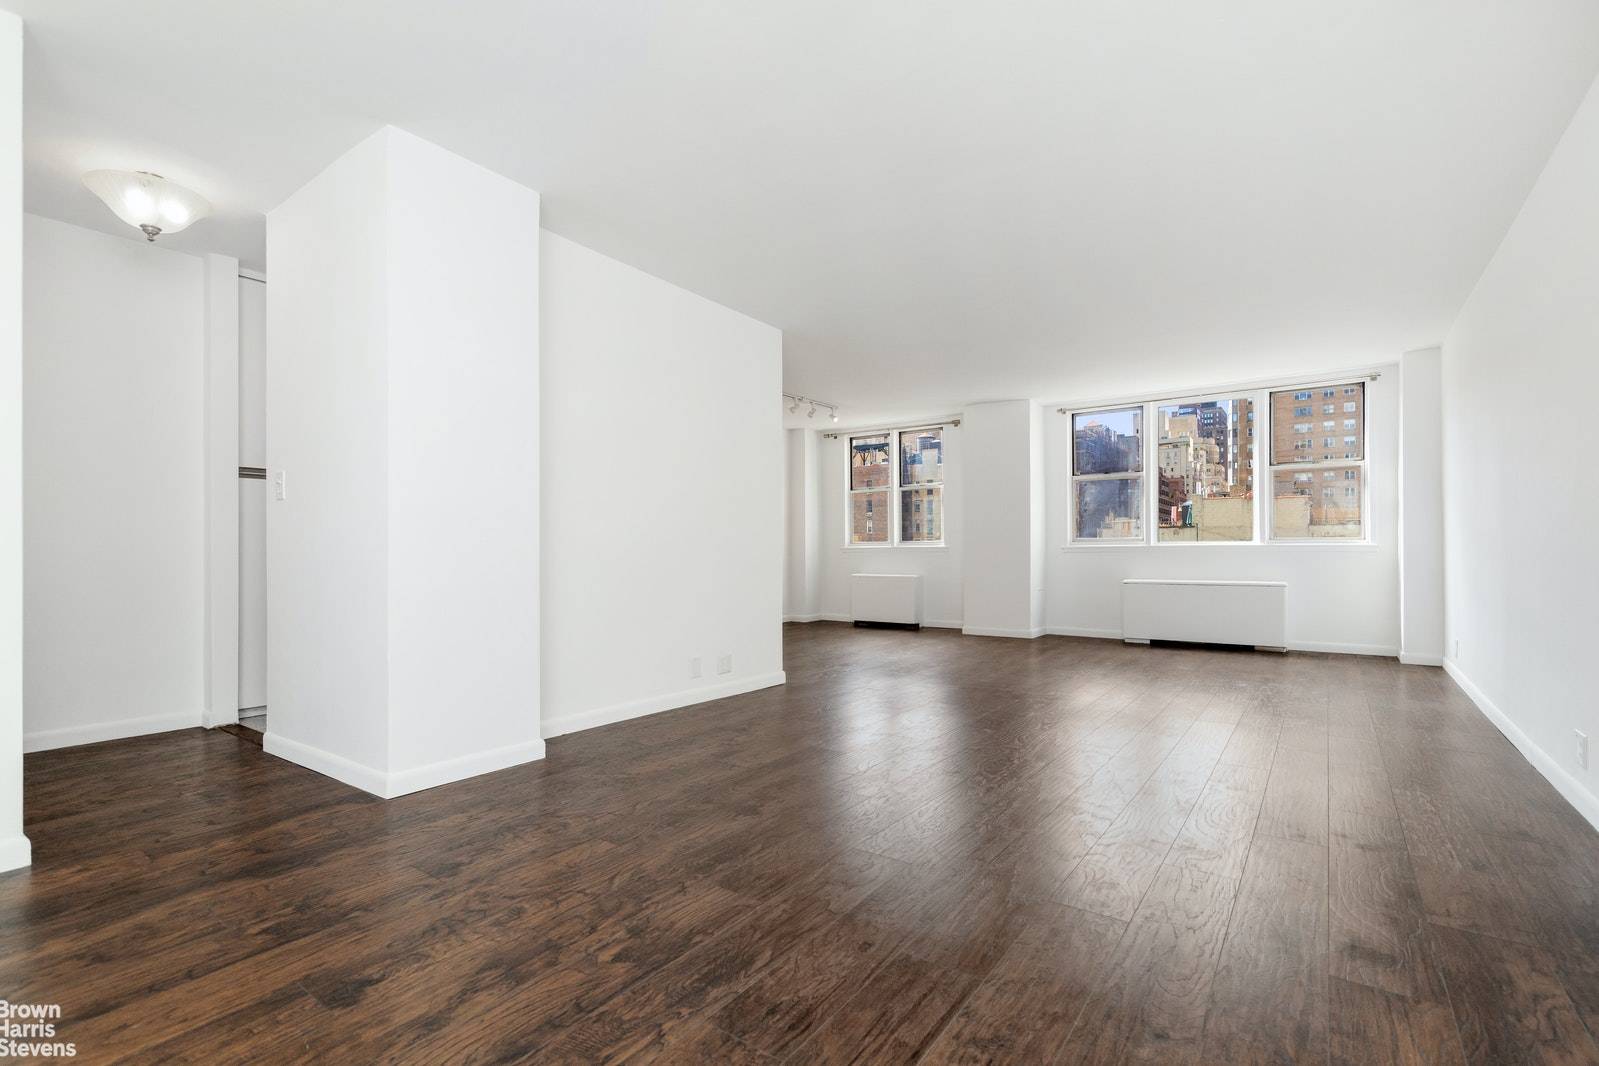 OPENHOUSE BY APPOINTMENTAt 904 sqft this sun flooded and over sized 1 bedroom apartment is the most coveted and rarely available line at the full service condominium, The Murray Hill ...